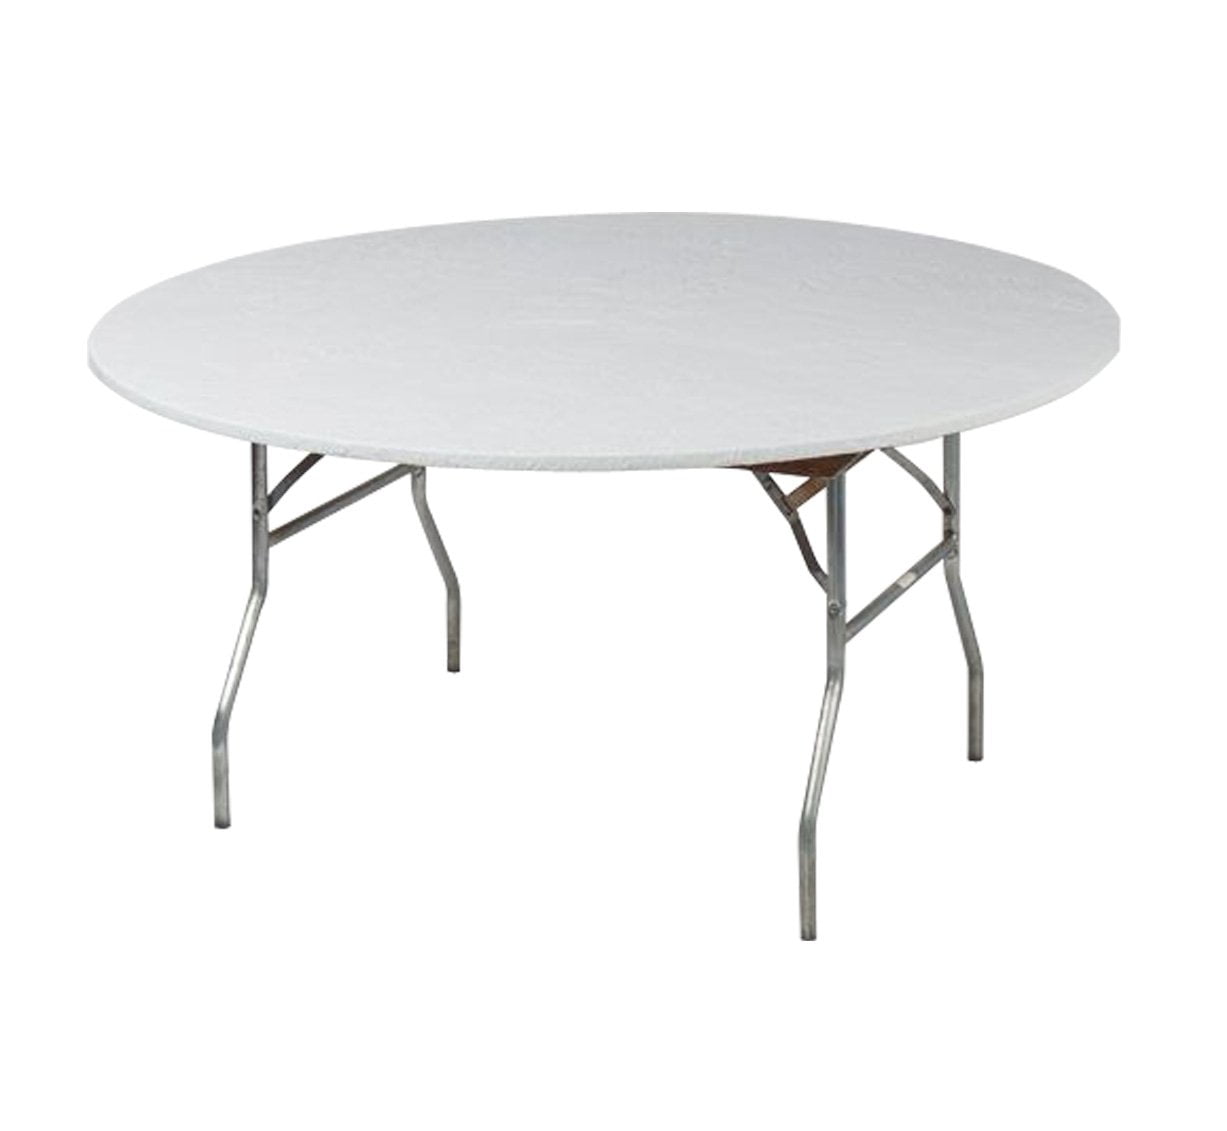 60" Round White Fitted Table Cover Single, Reusable or Disposable By